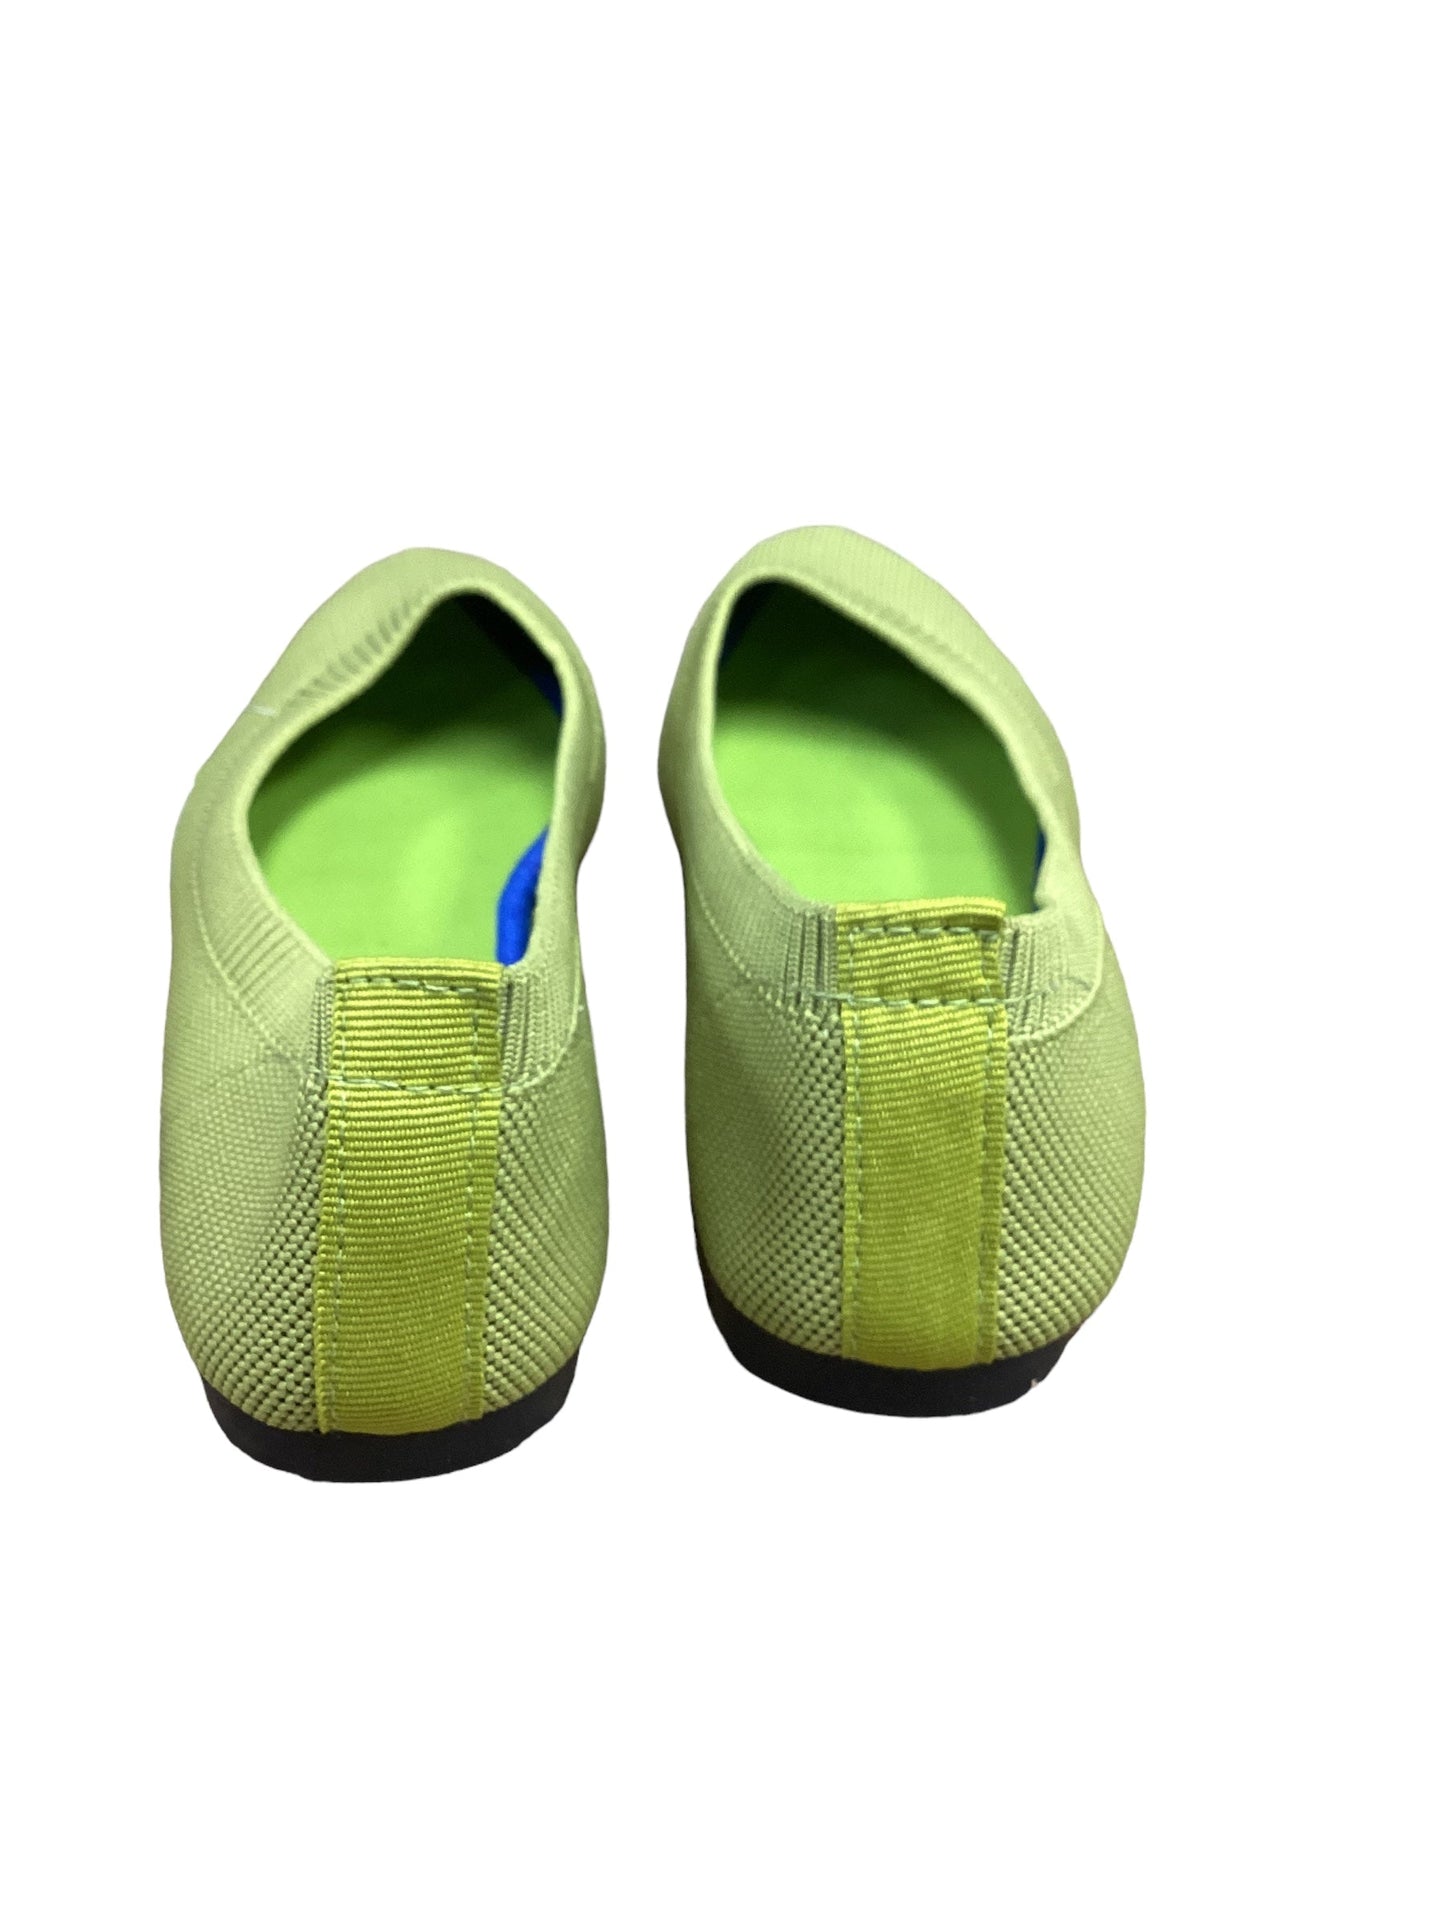 Green Shoes Flats Clothes Mentor, Size 8